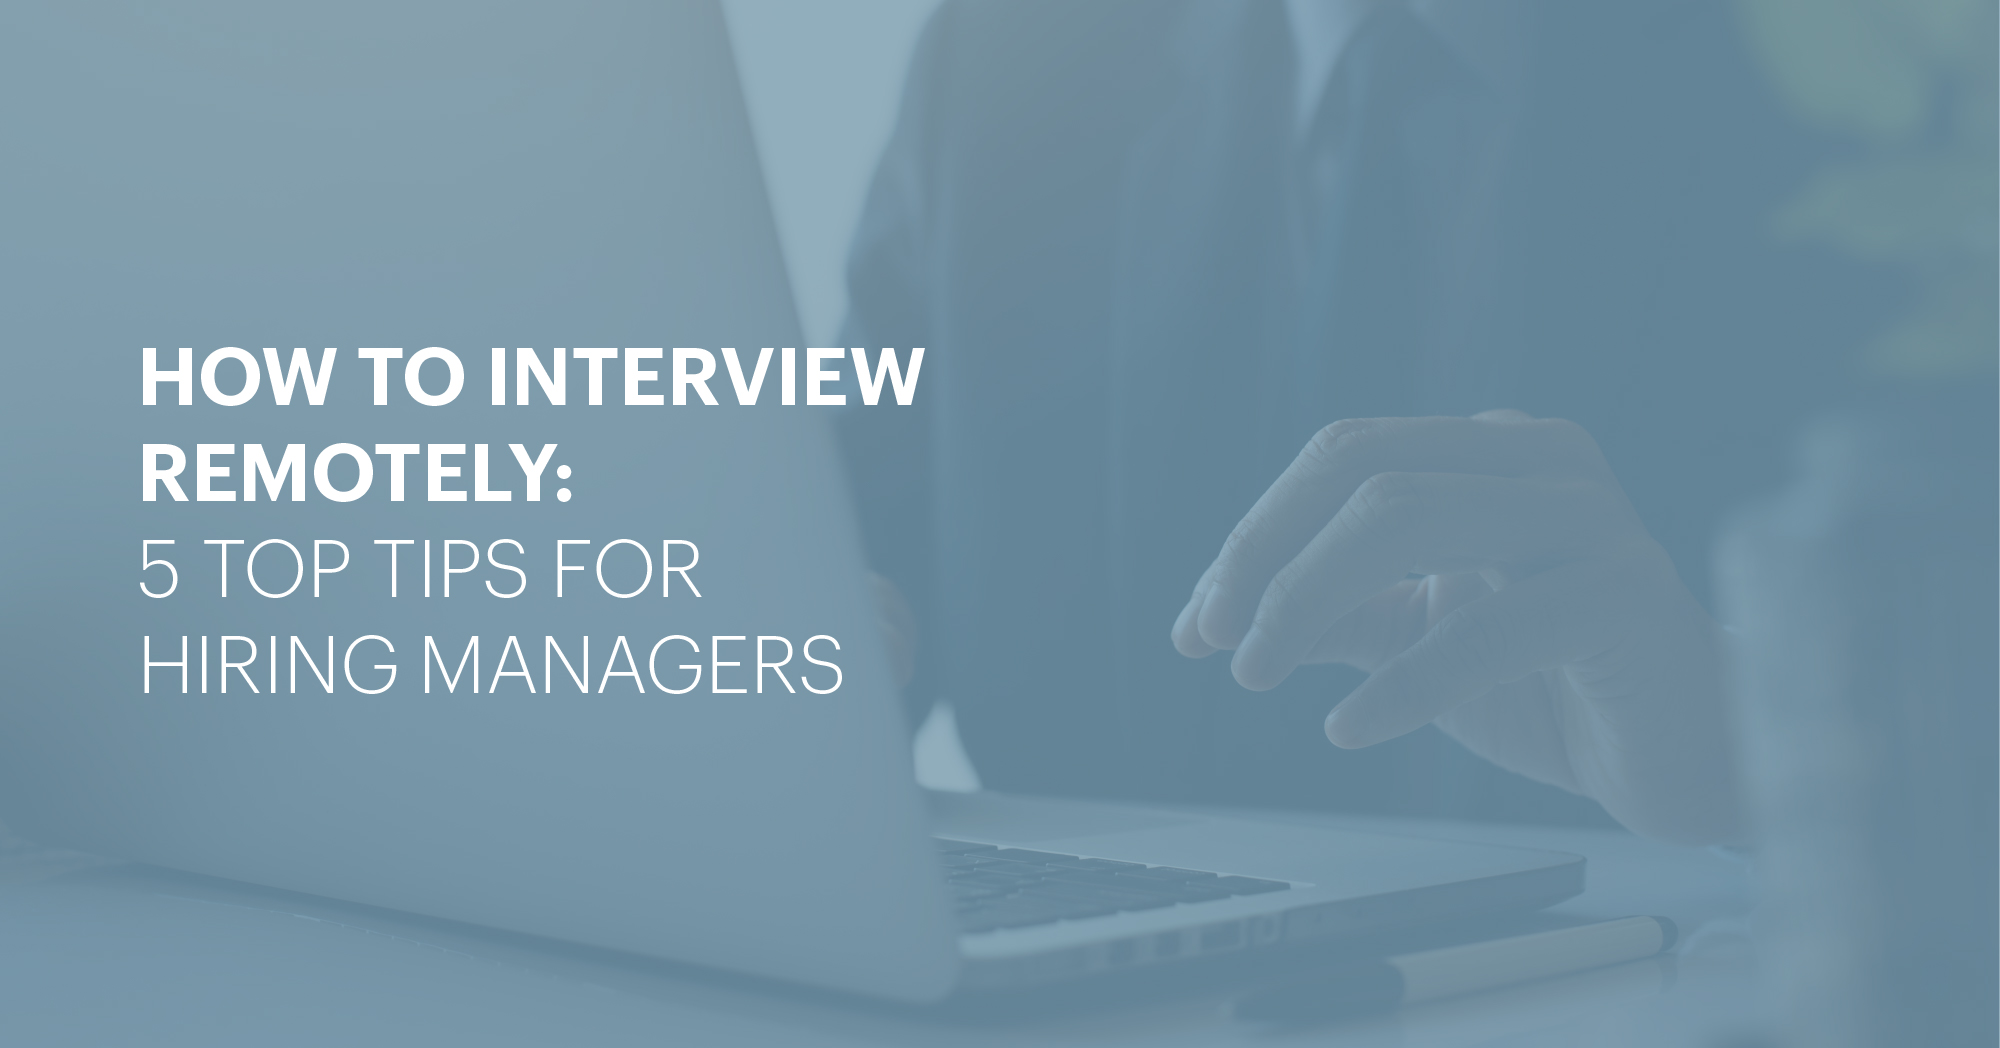 How to interview remotely